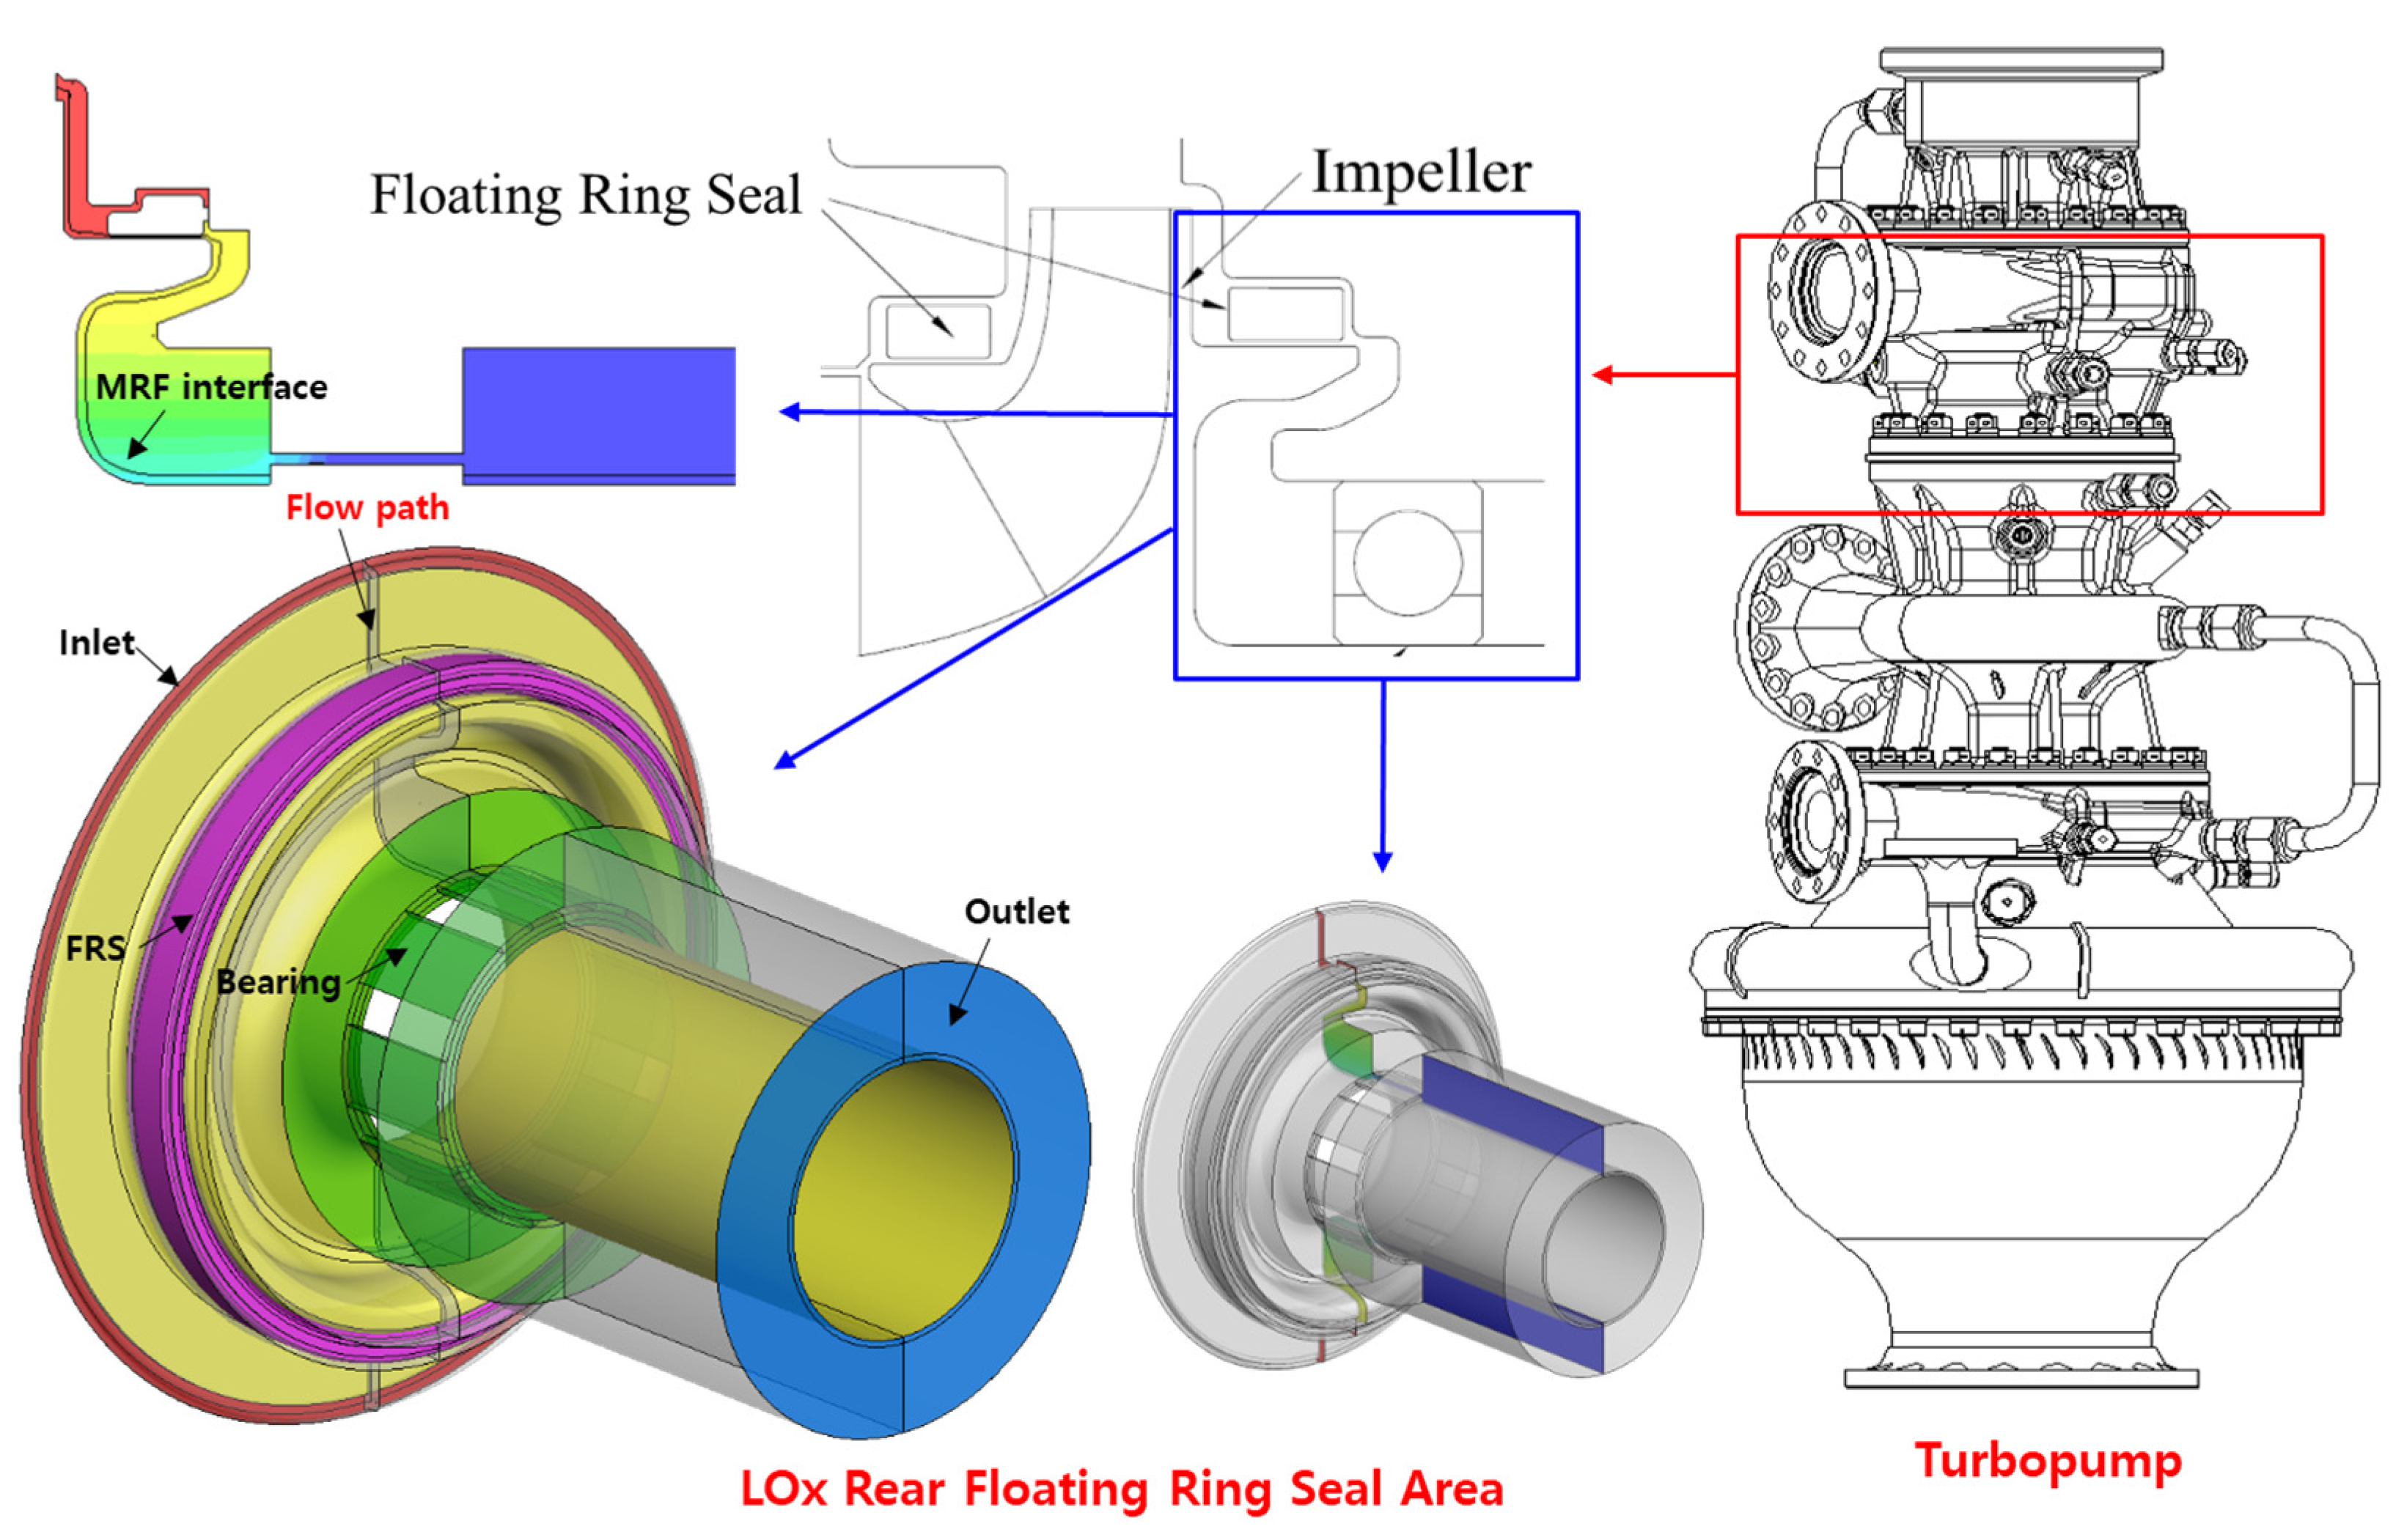 Configuration of a floating-ring seal having two sealing rings with a